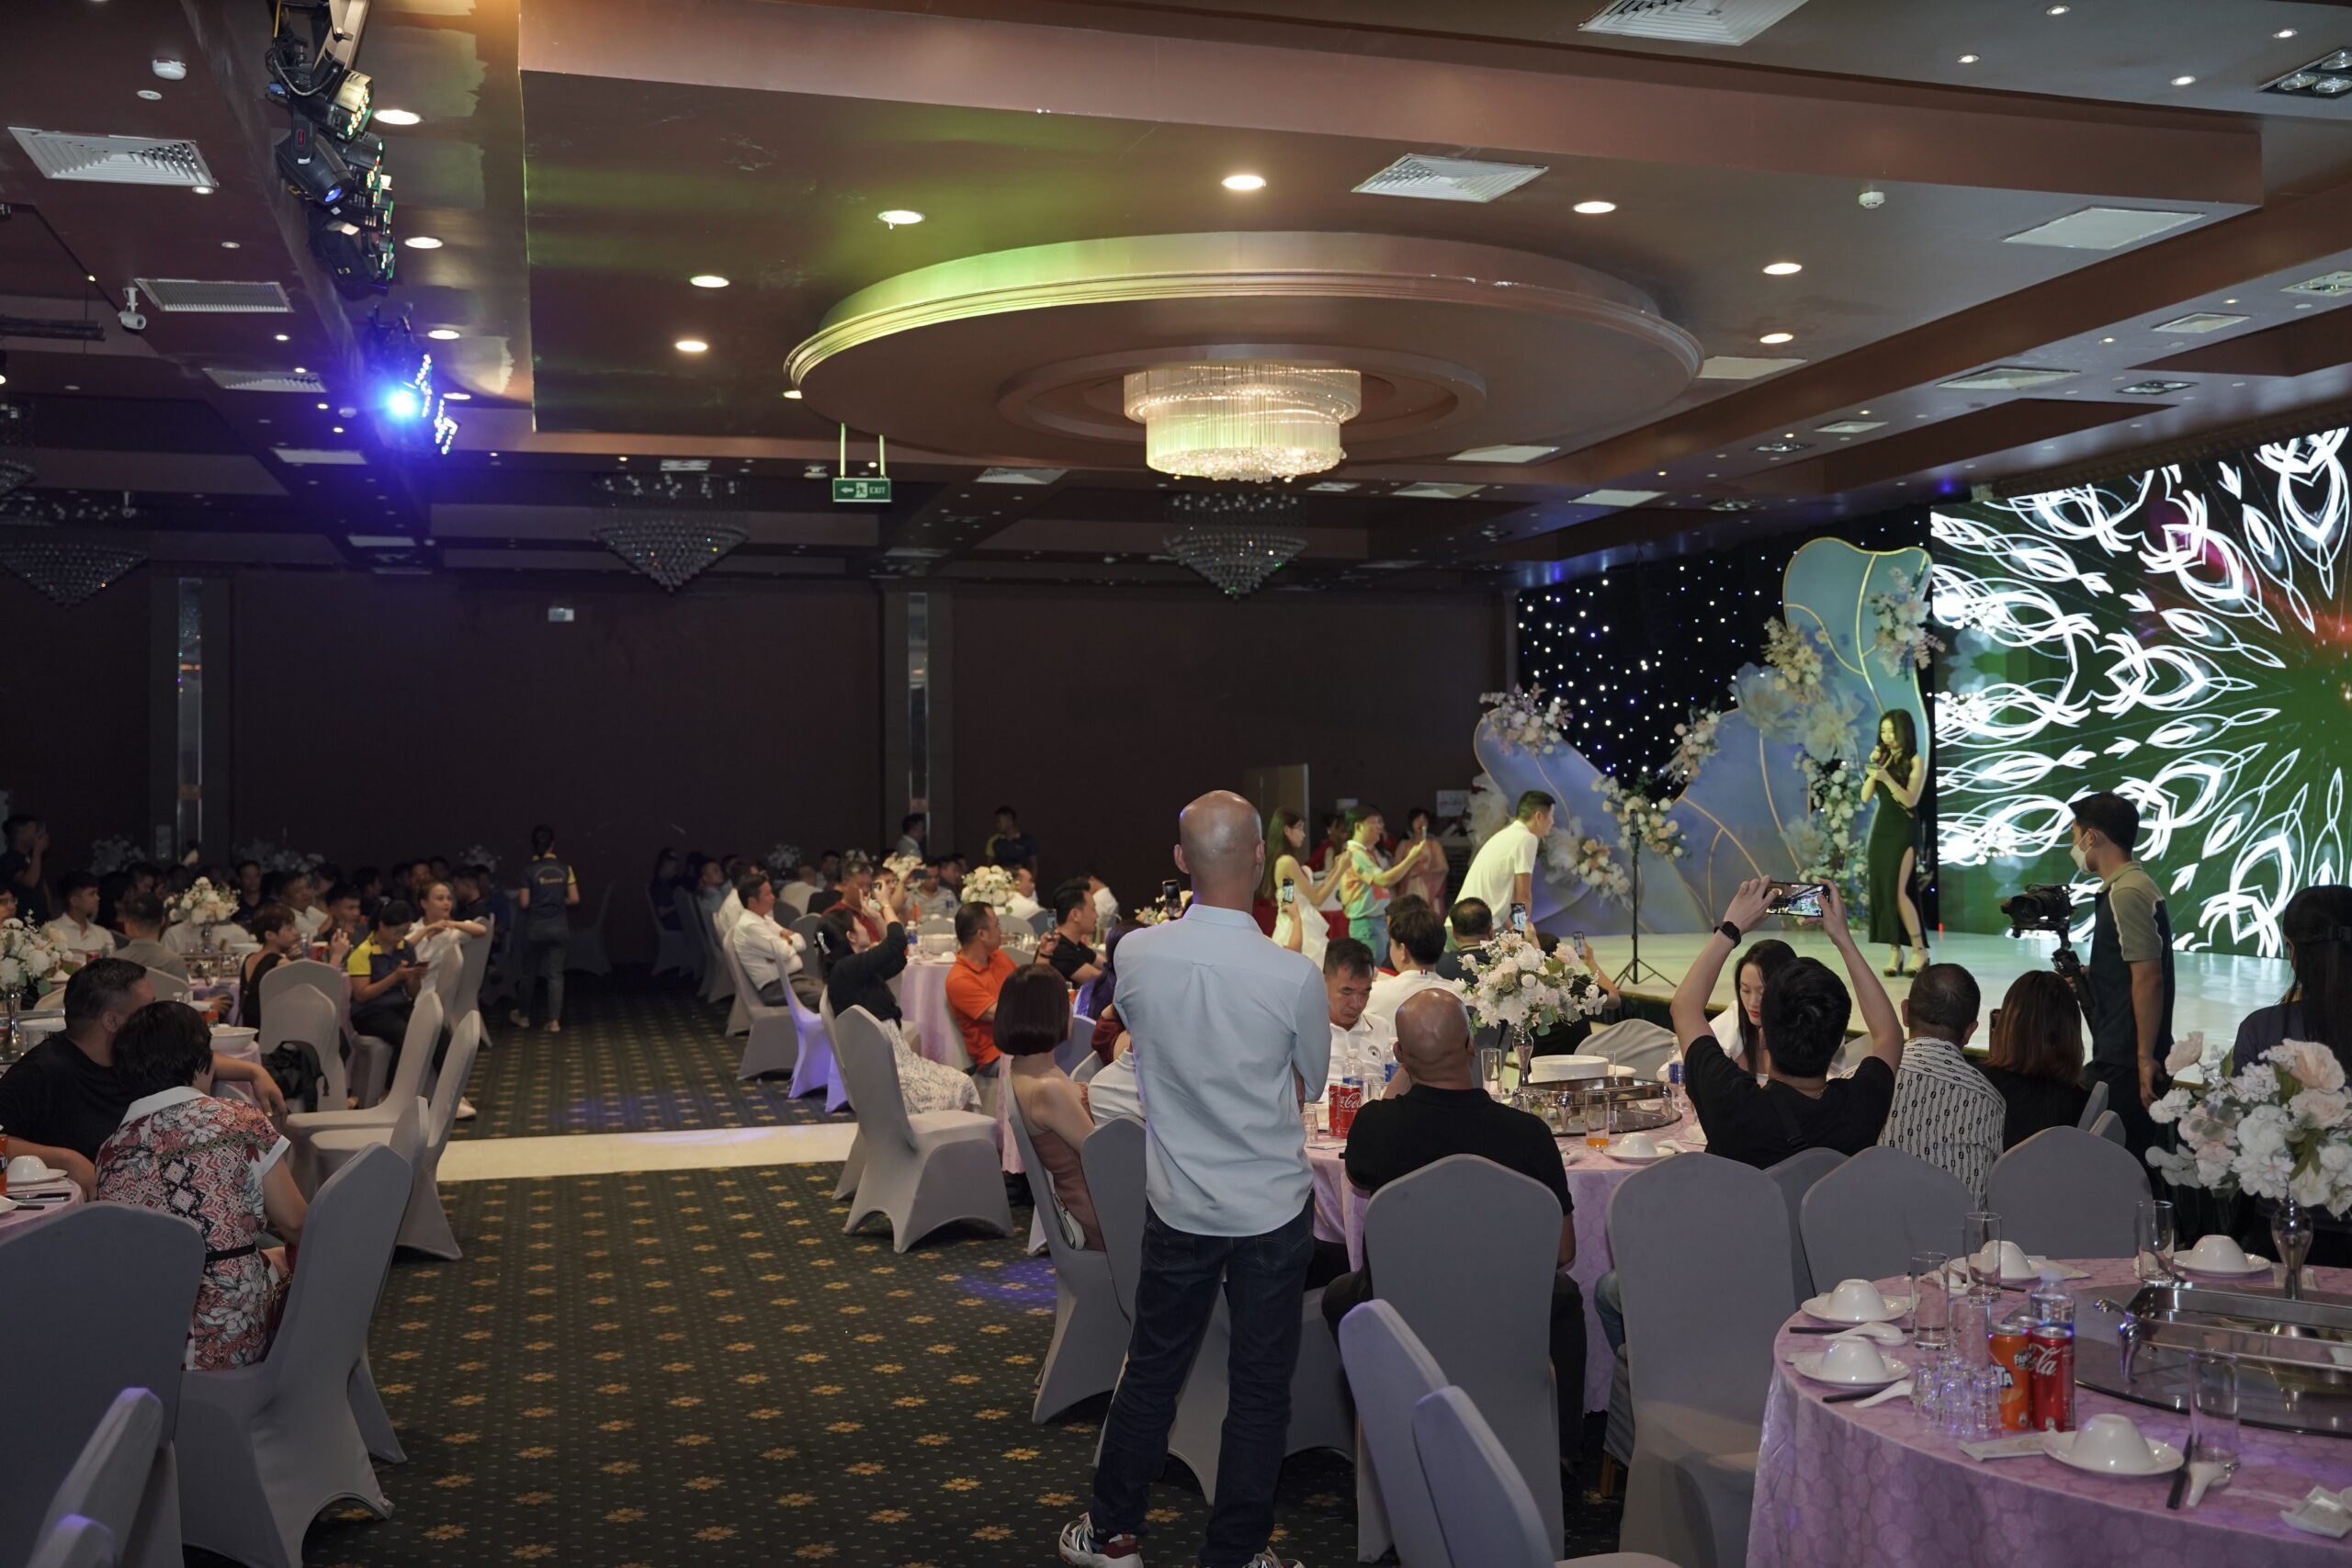 anh gala dinner khai truong showroom tomko 192 le thanh nghi trong dong canh ho